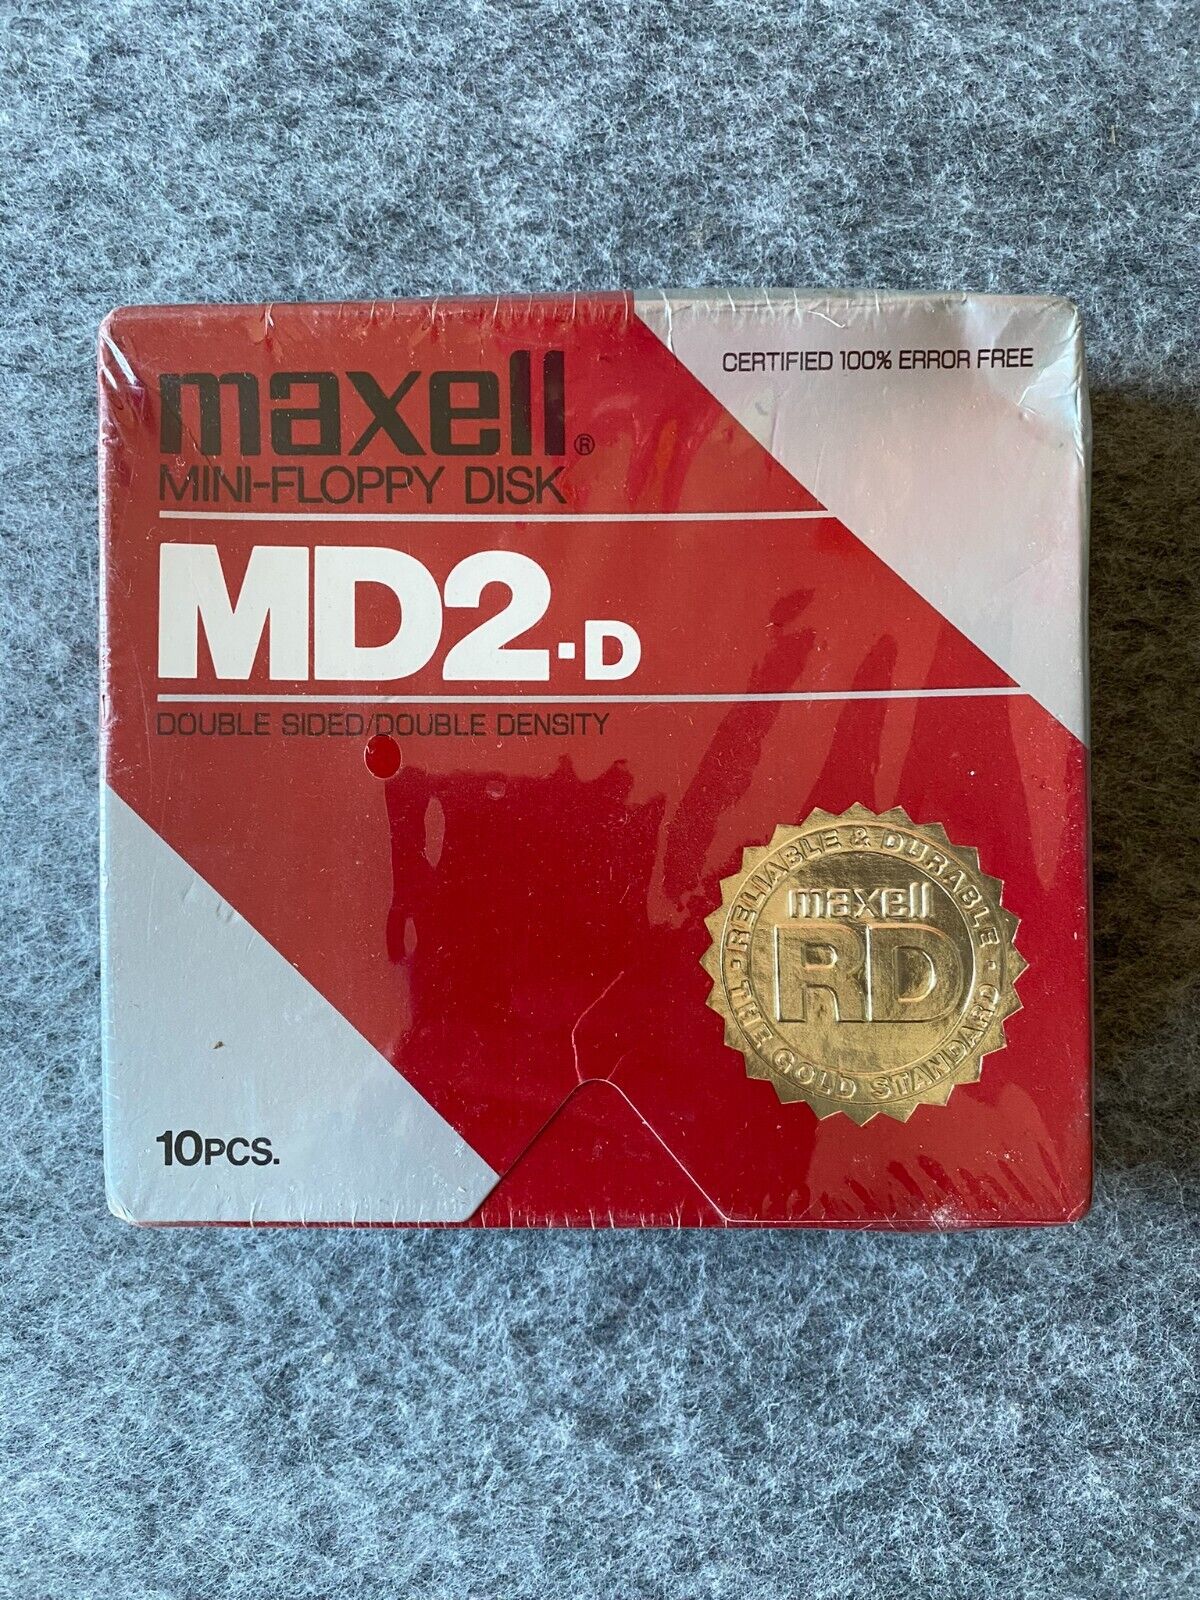 SEALED Maxell Mini-Floppy Disk MD2-D 10 Pieces NEW Double Sided Density Vintage